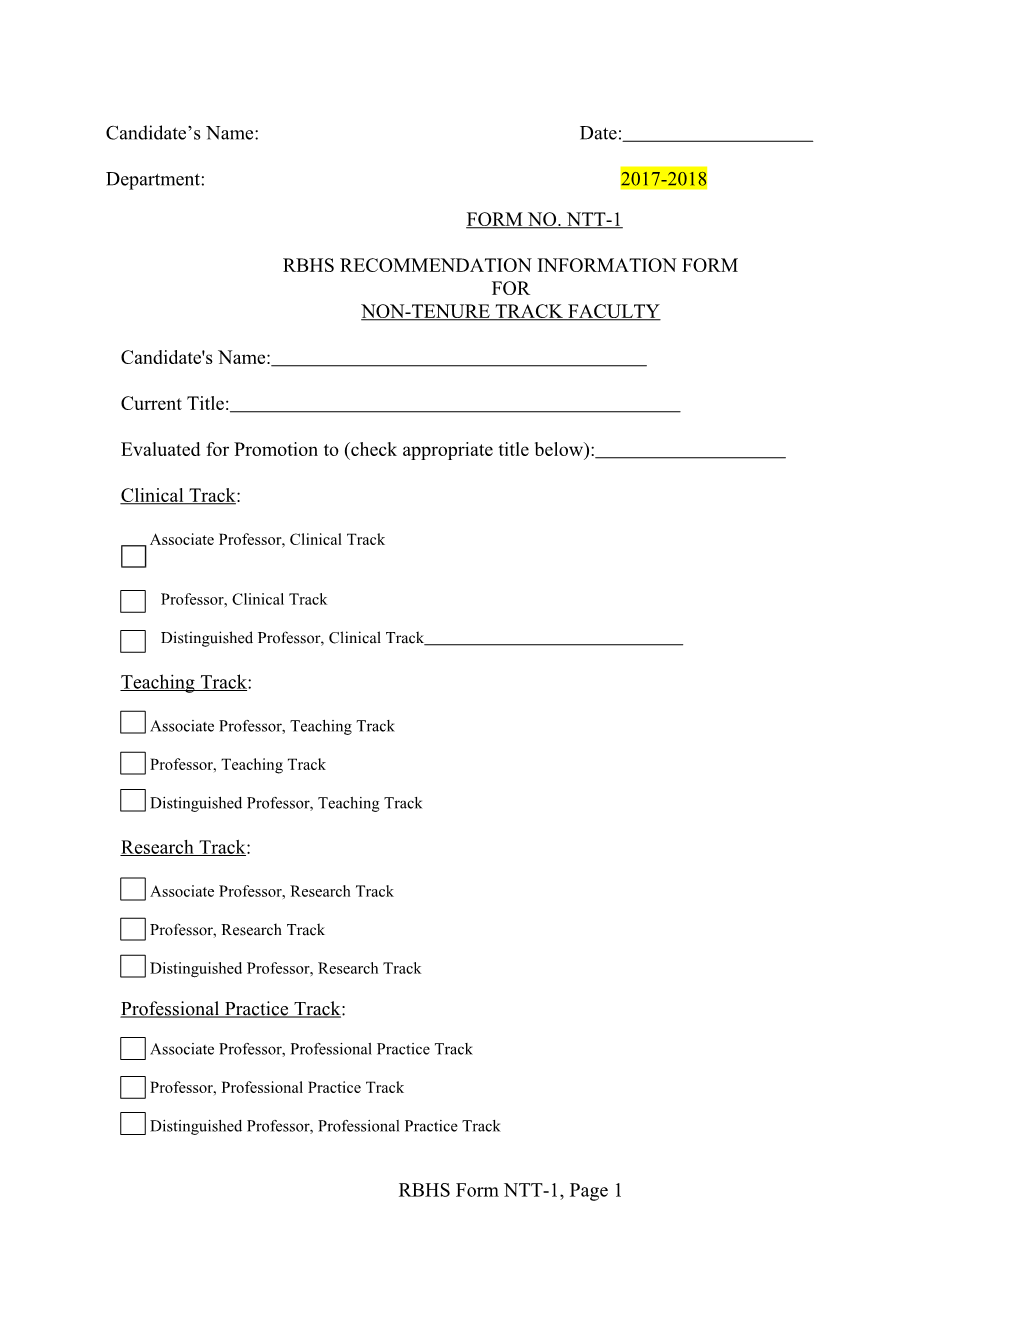 Rbhs Recommendation Information Form